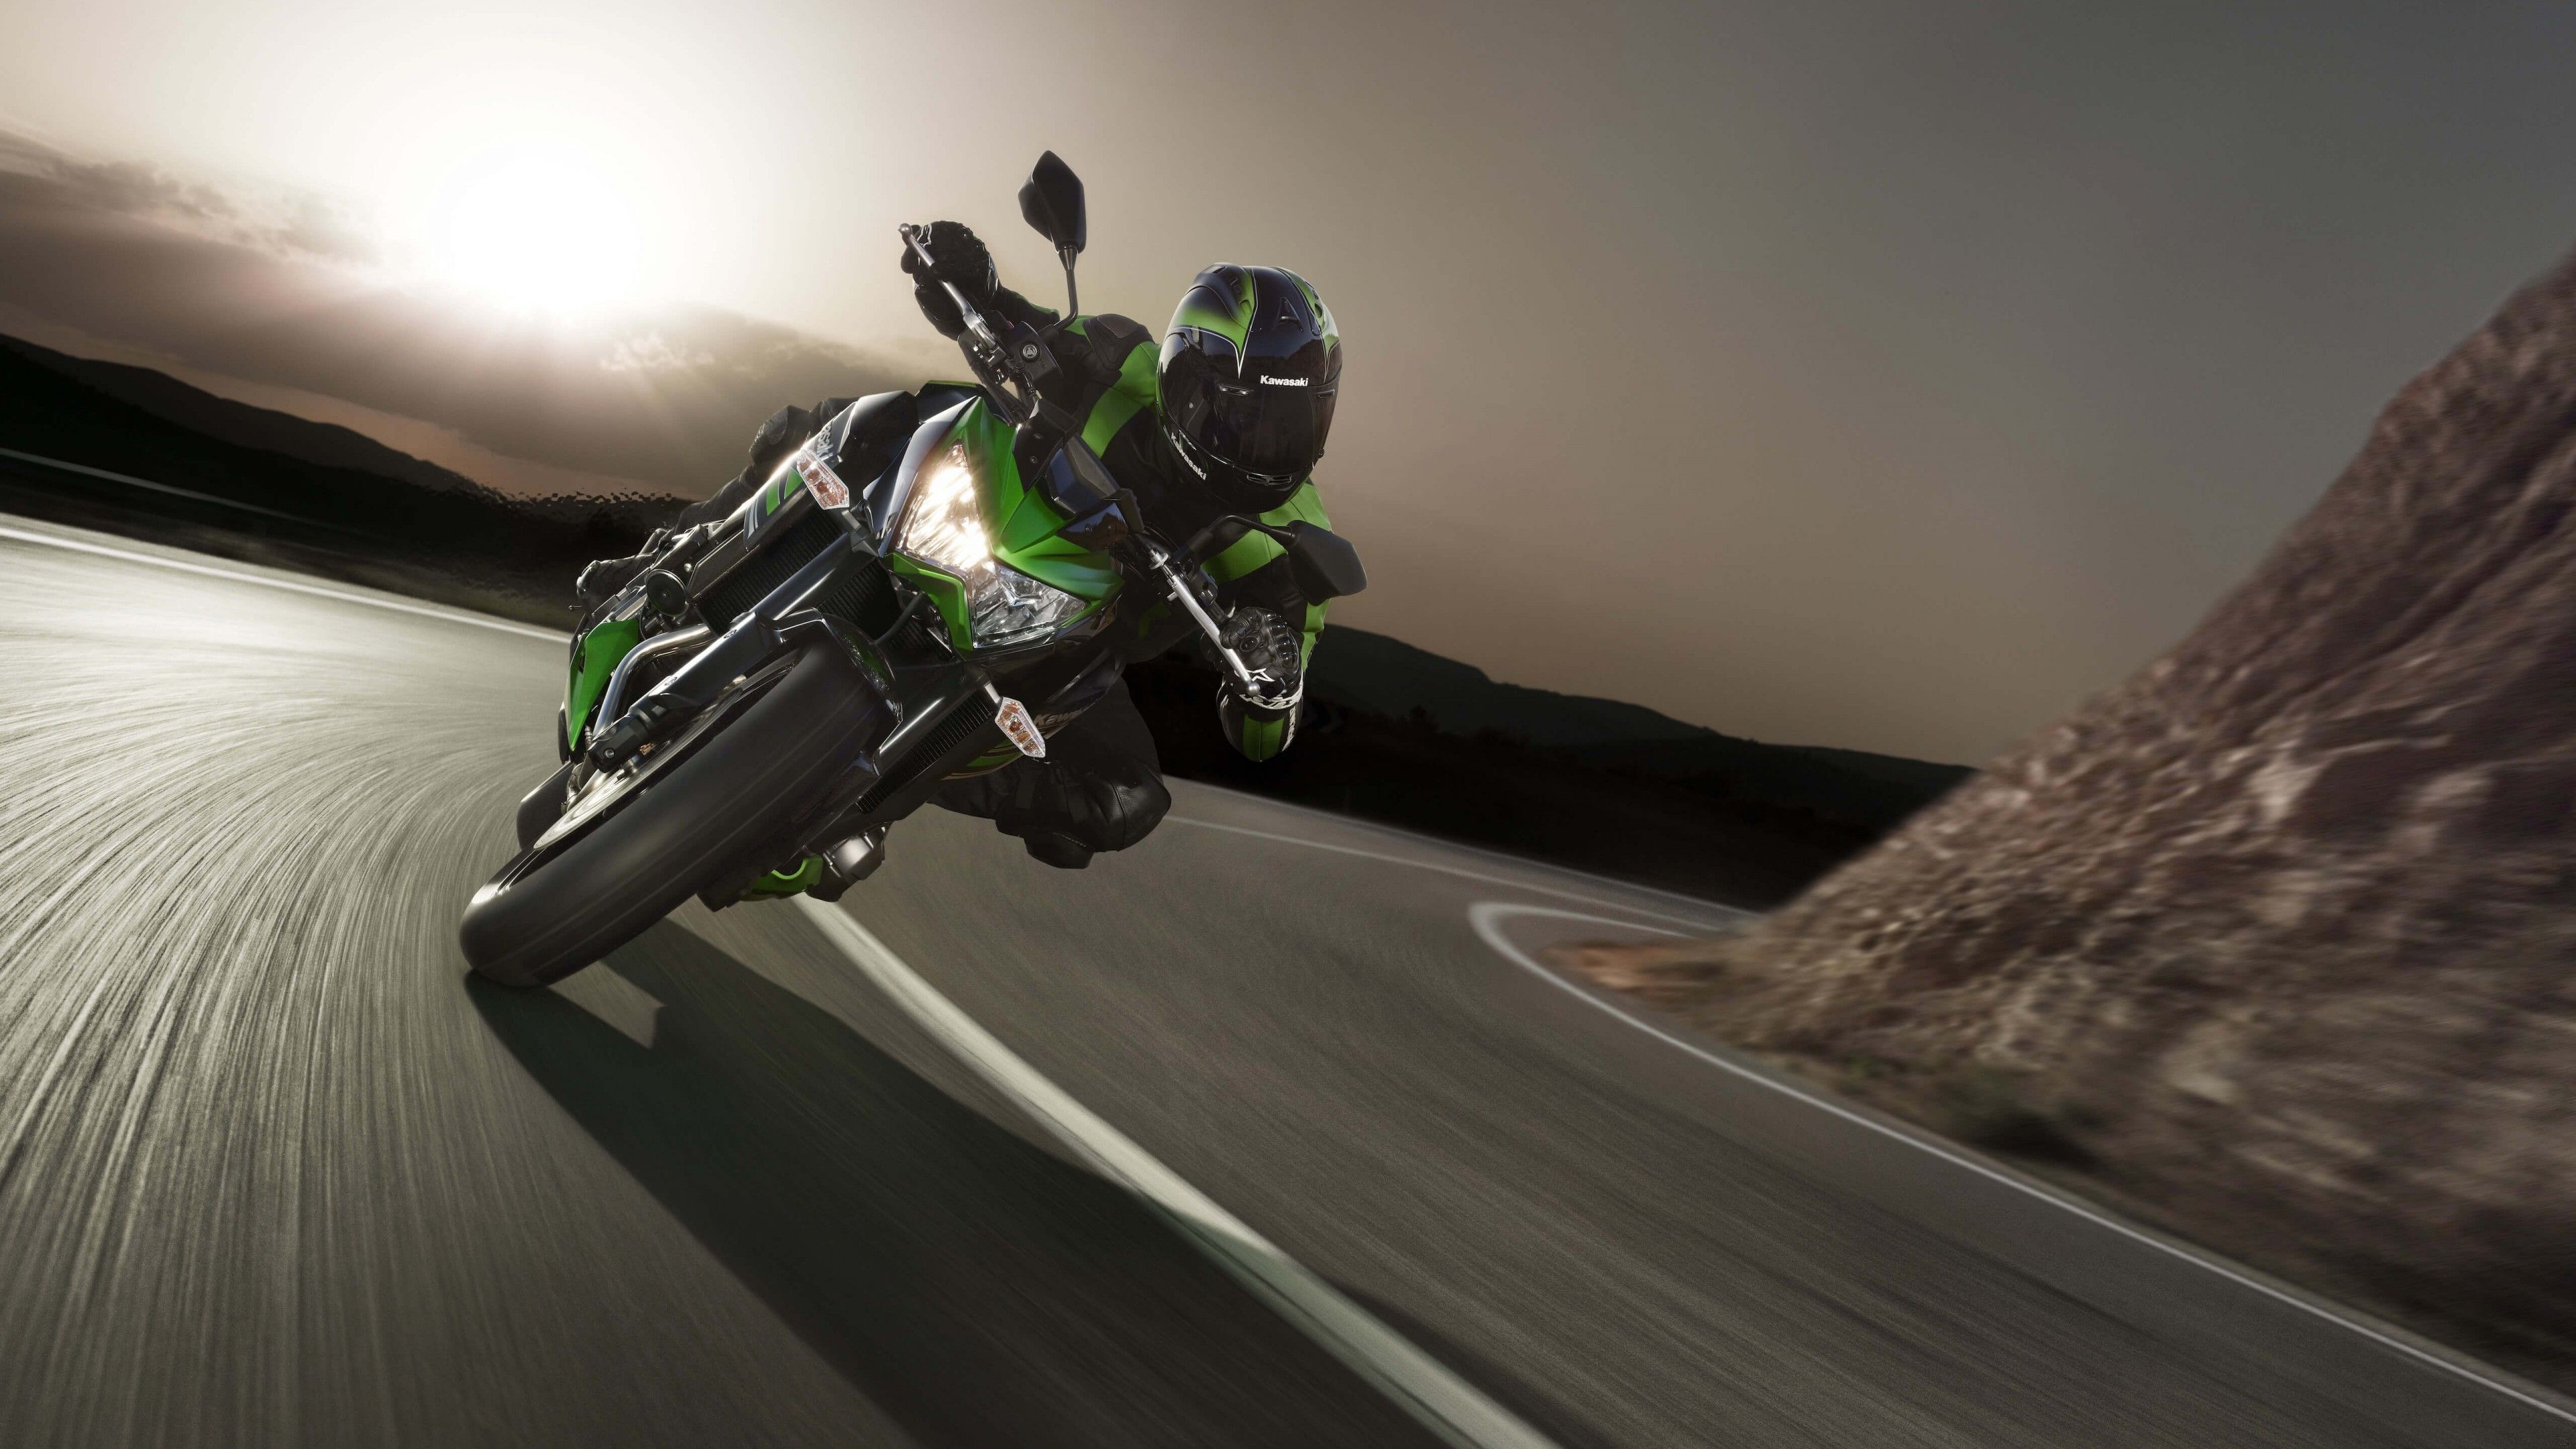 Zx10r 4K wallpaper for your desktop or mobile screen free and easy to download